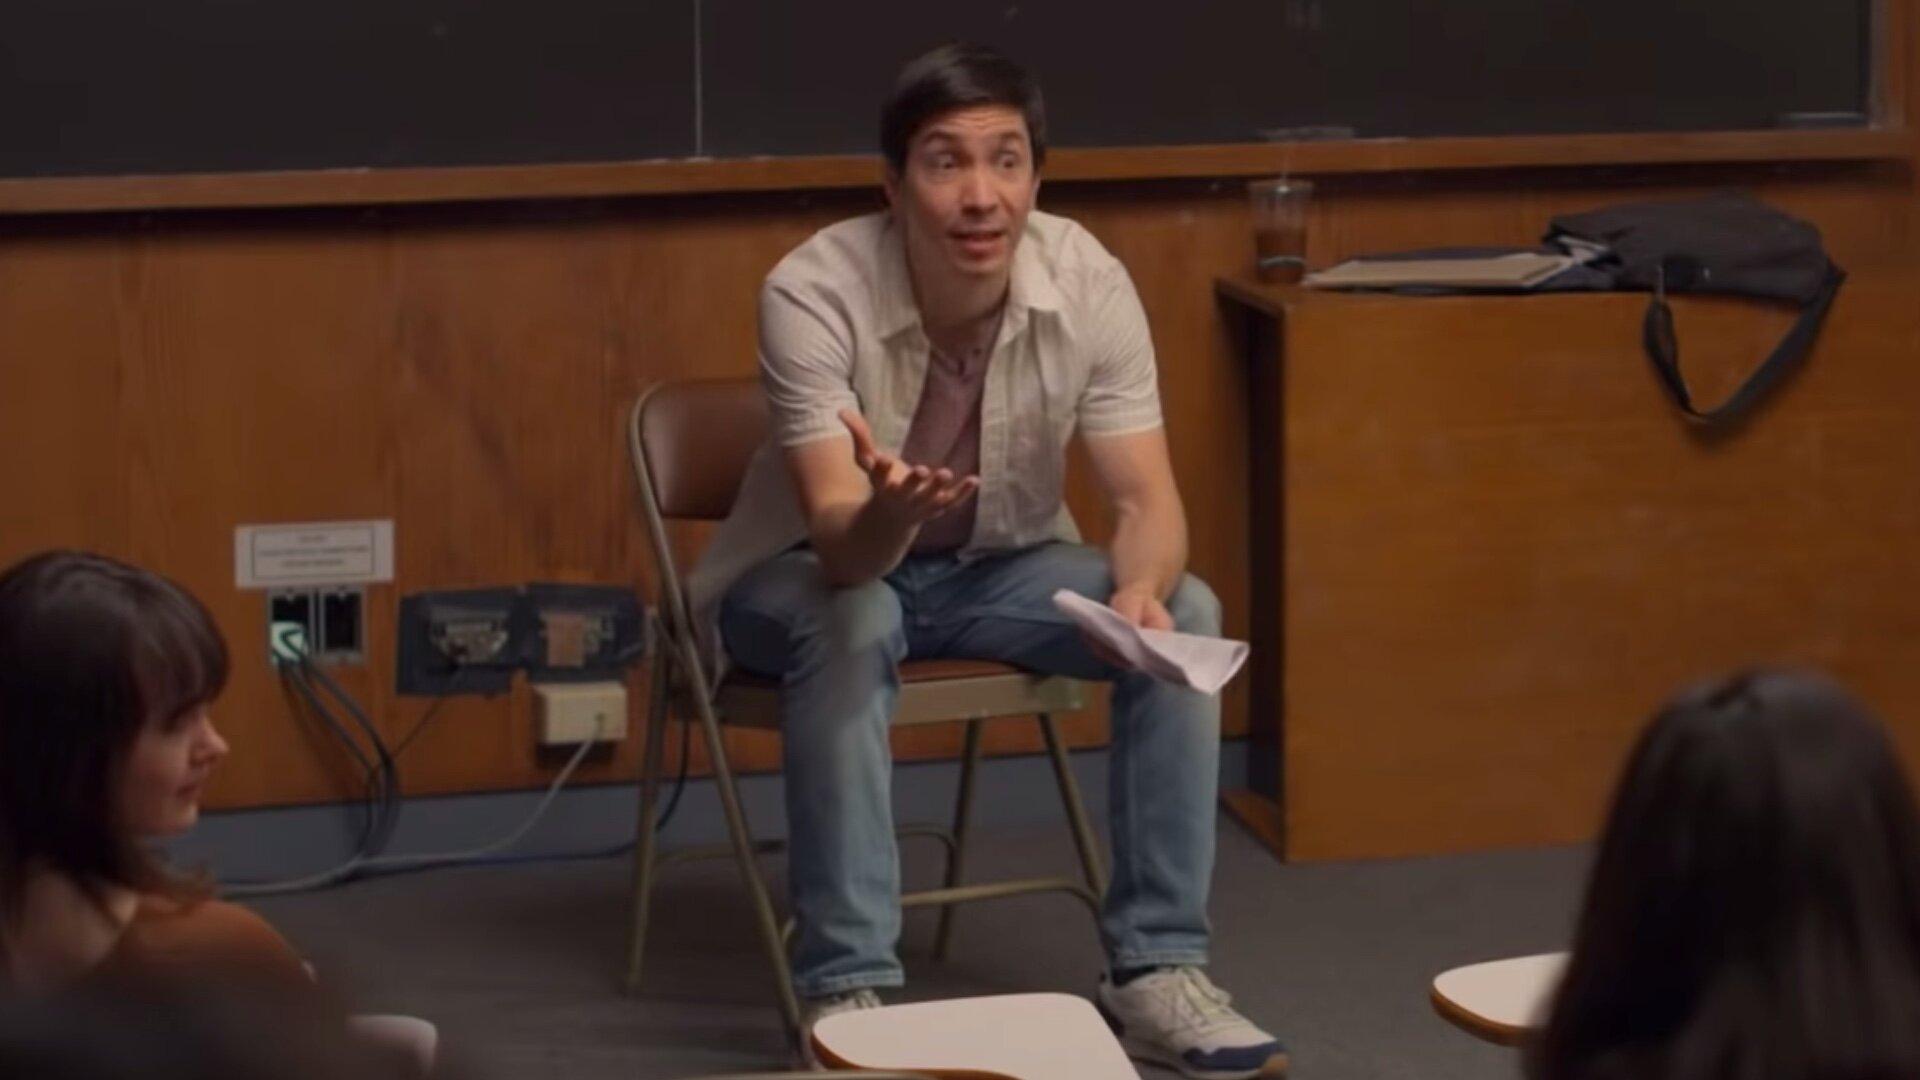 Touching Trailer For Justin Long's Film AFTER CLASS — GeekTyrant